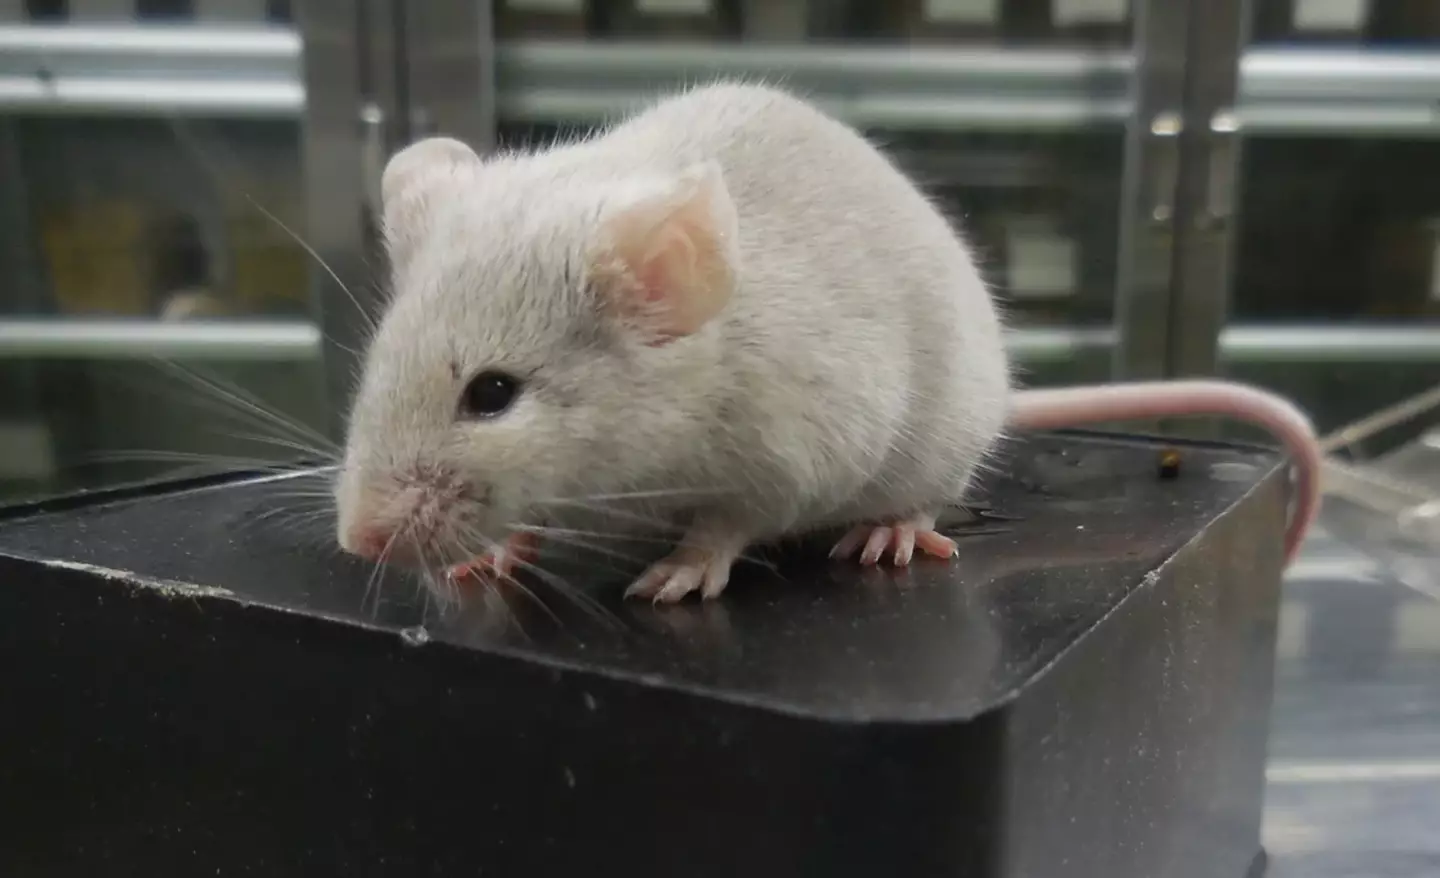 Scientists used cells from lab mice.